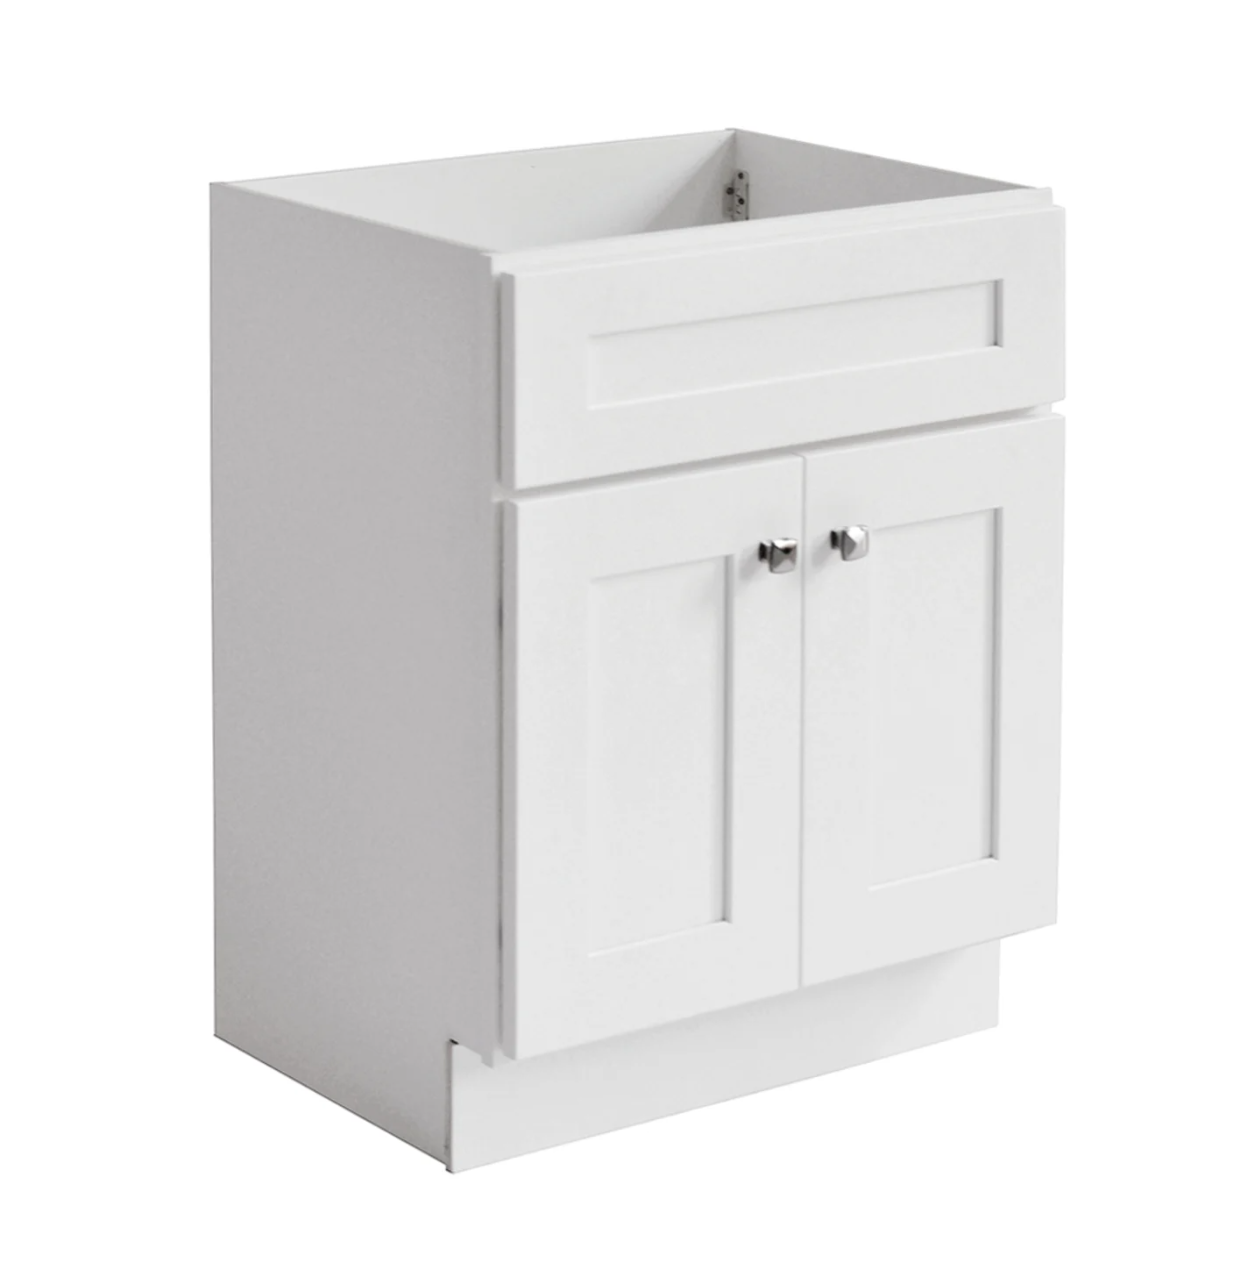 WHITE SHAKER WITH DOUBLE DOORS VANITY 24'X21'-3/4"X34.5' Quartz Counter Top Included